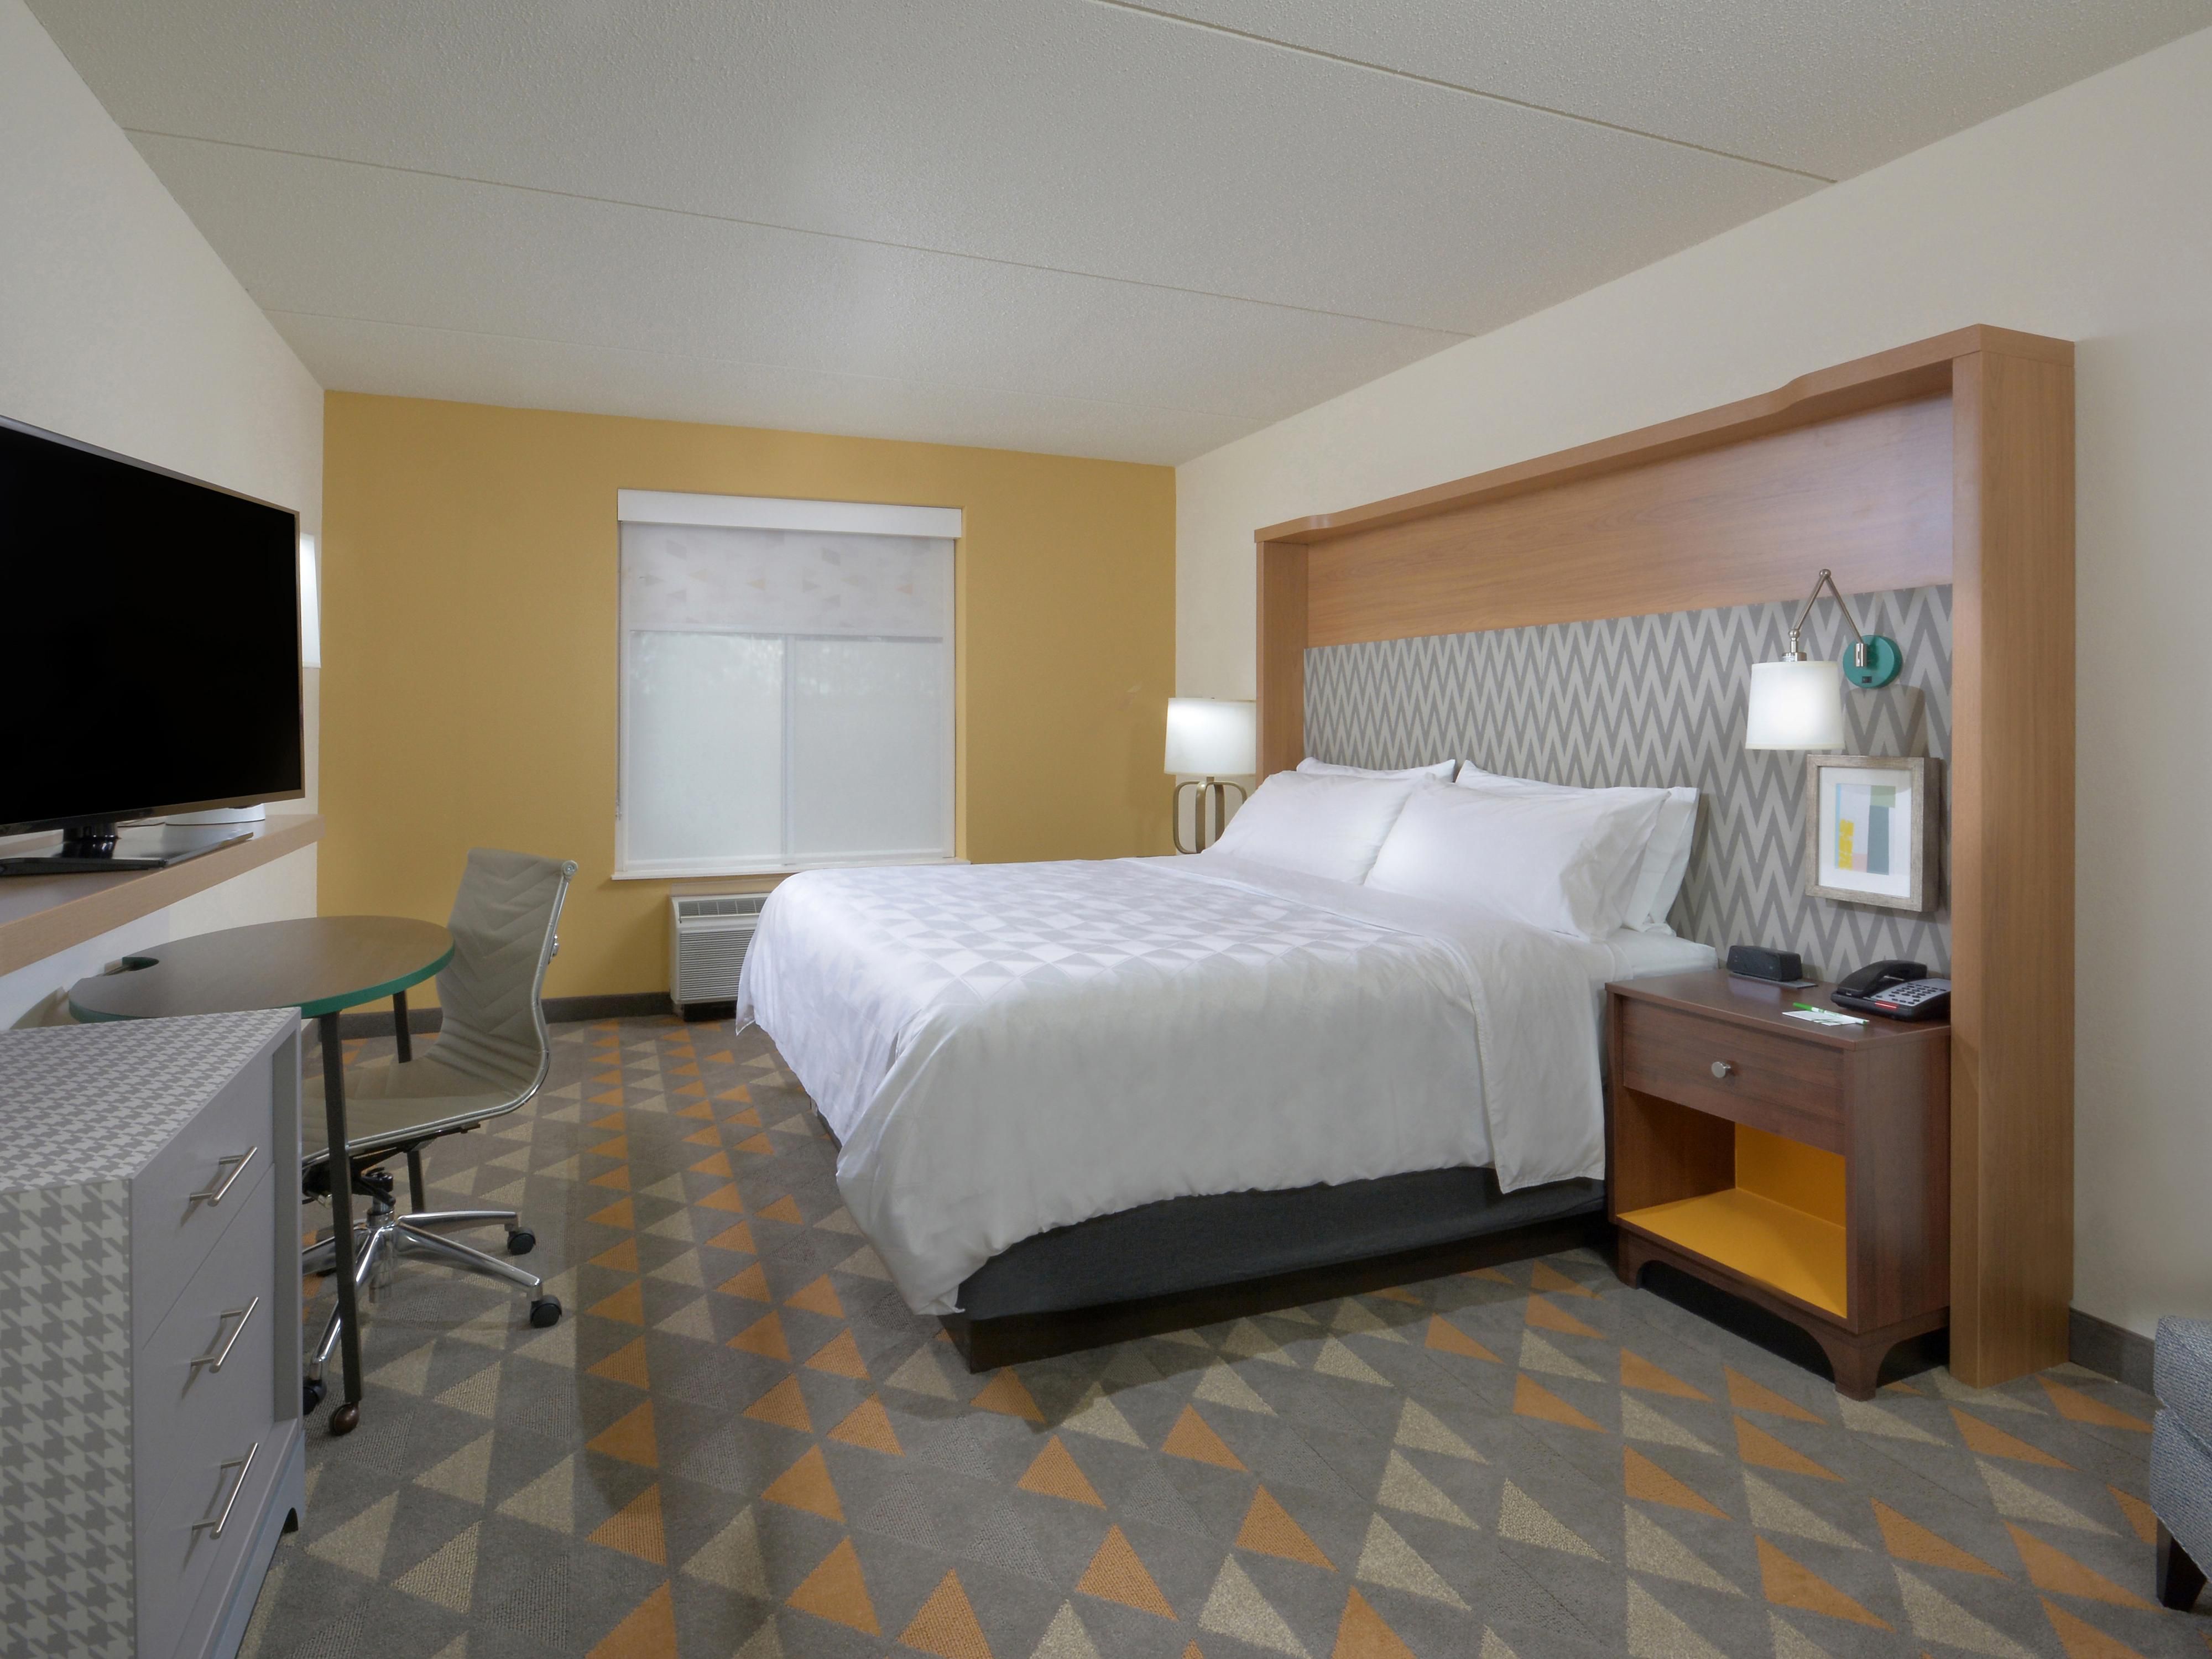 You'll appreciate the bright and modern design of our hotel rooms near the RDU airport.  Melt into our comfortable beds, complete with soft linens, before sleeping soundly in a room darkened by true blackout shades.  Wake refreshed, brew a fresh coffee in your Keurig coffeemaker, and then head out to make the most of your day!